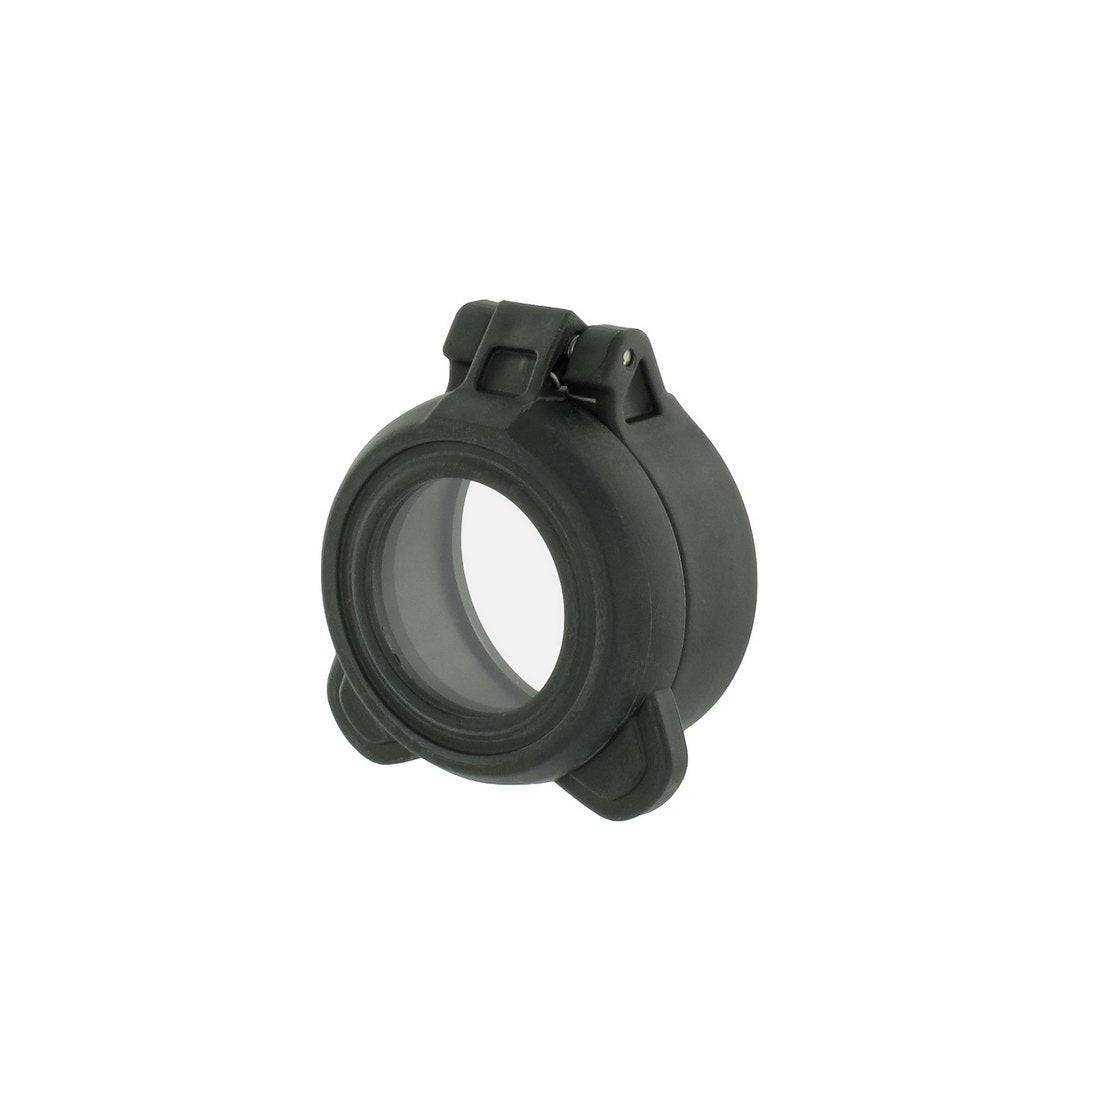 Aimpoint Riflescope 9000SC-NV 200136, 2 MOA target sight without fittings